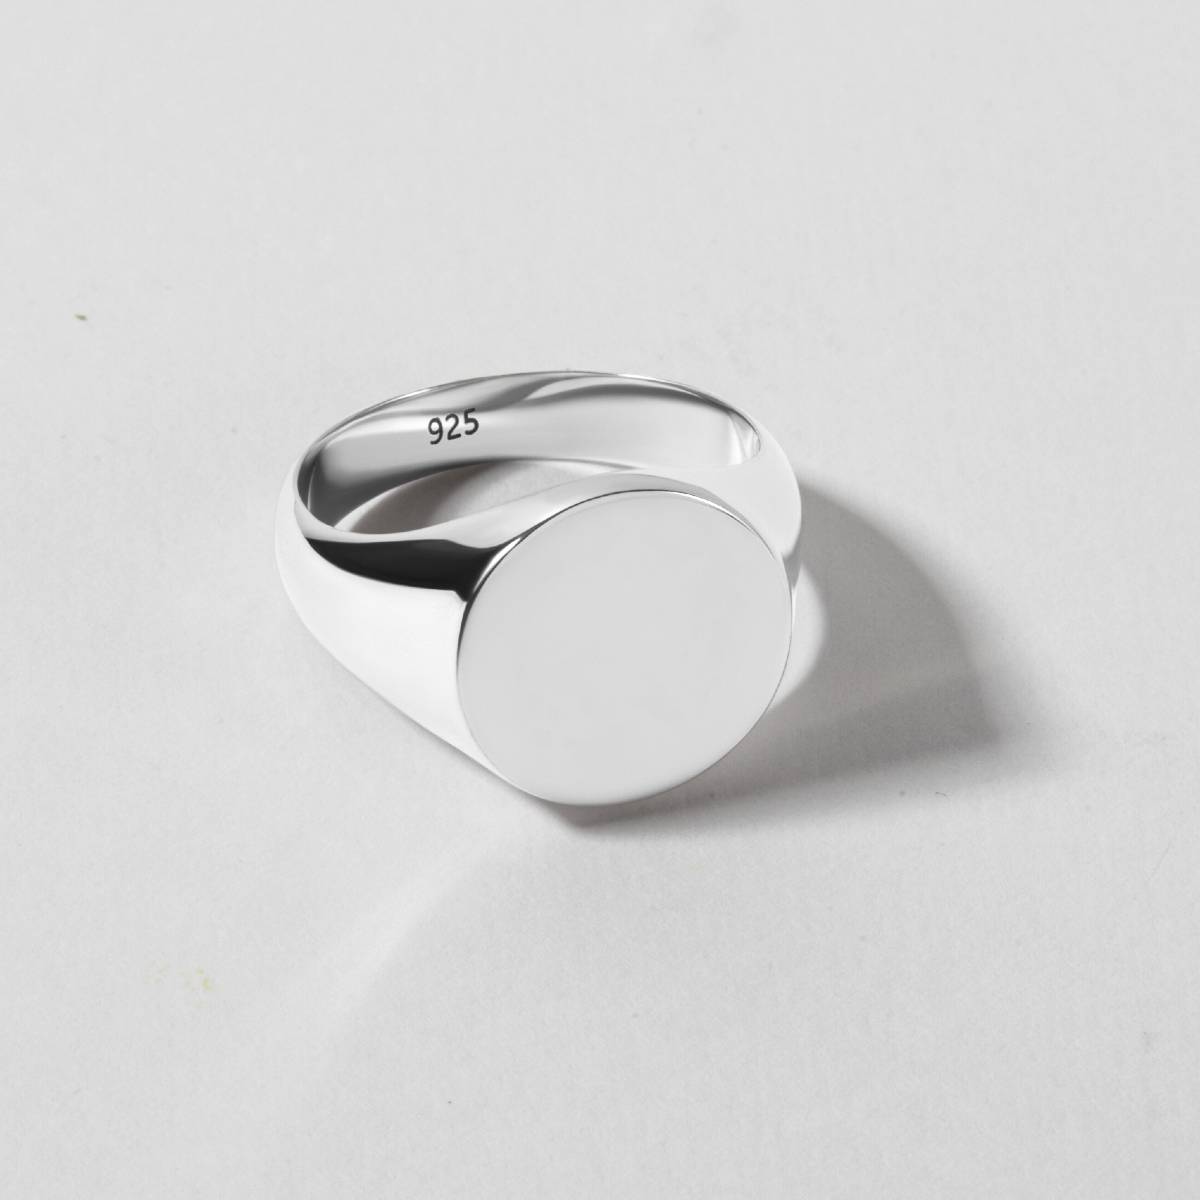 Unisex Signet Rings | The Silver Store